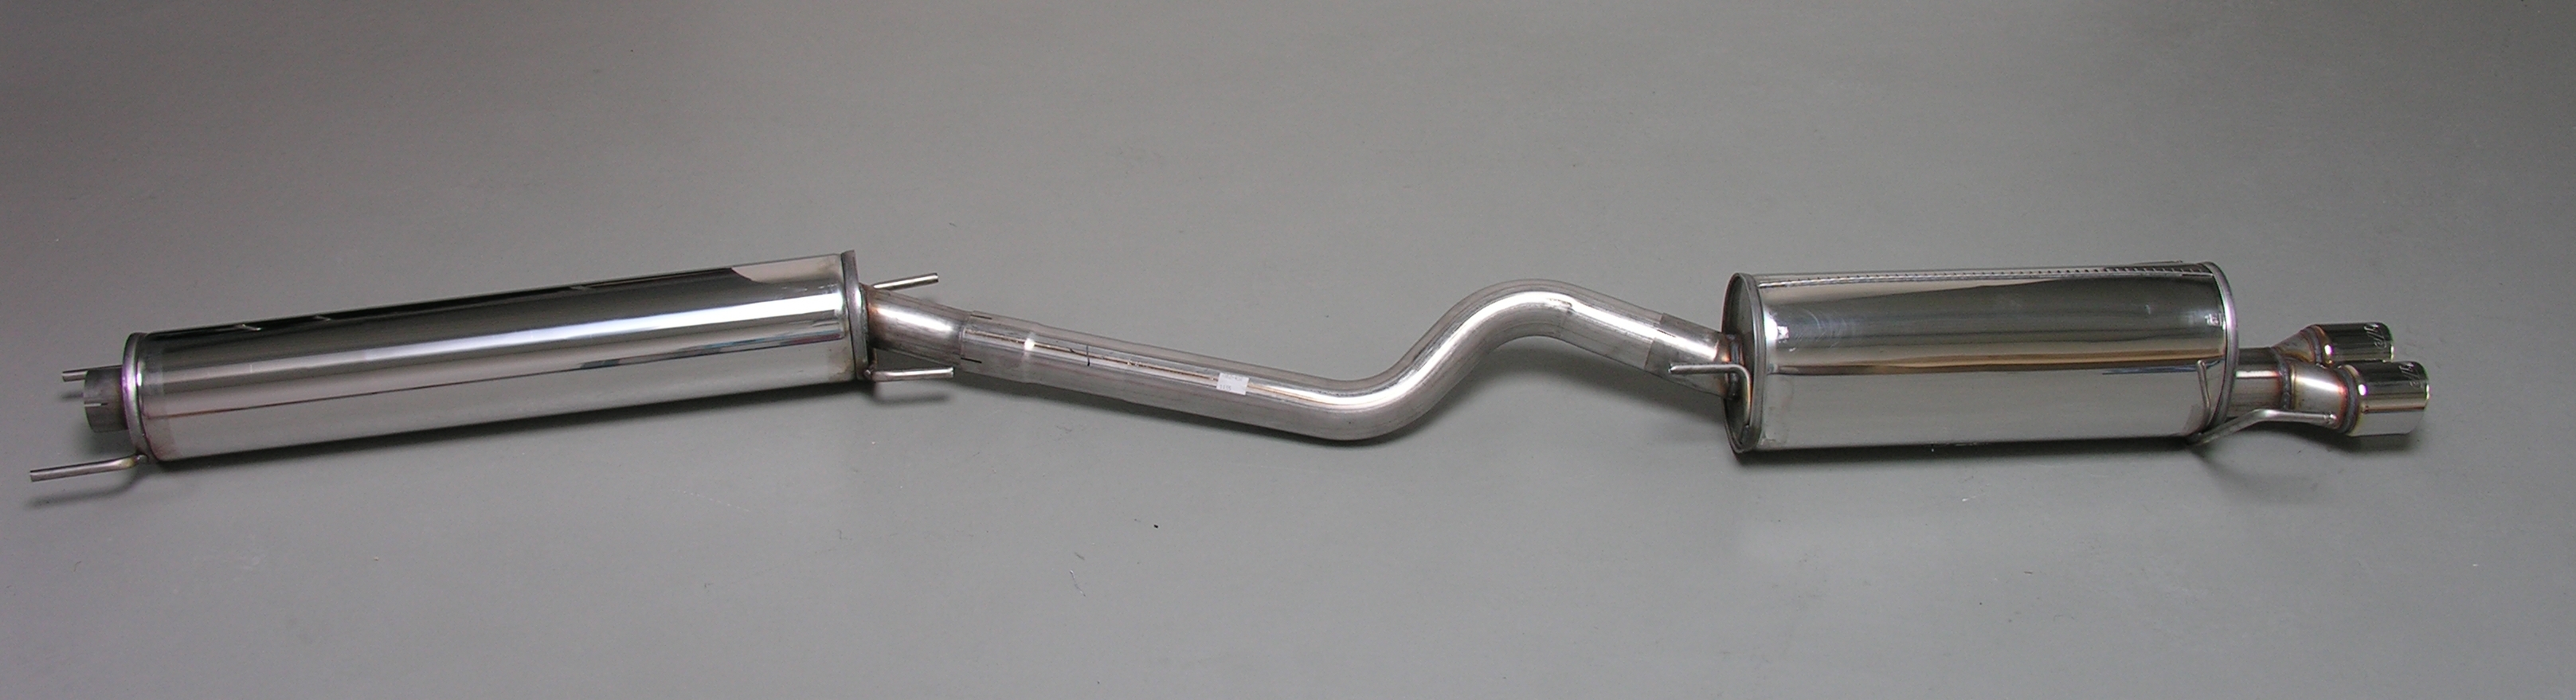 Stainless Steel - Exhaust systems for Opel/ Vauxhall H Twintop